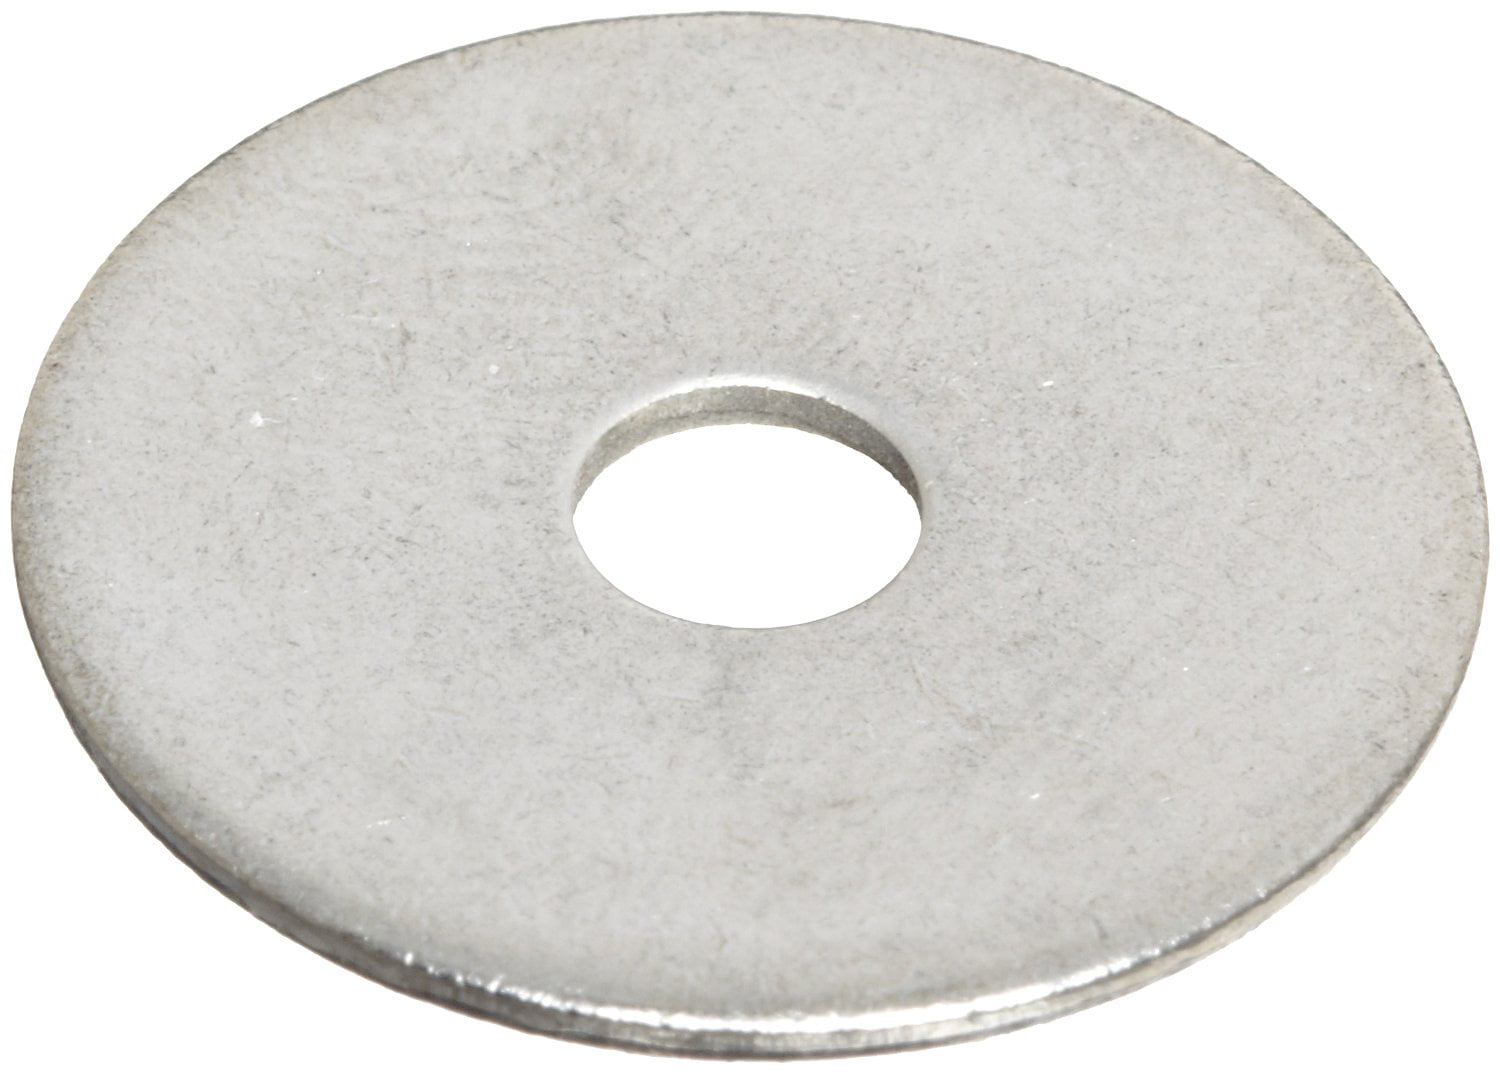 250 1/4" Stainless Steel Flat Washers 5/8" OD / .037 Thick 18-8 Stainless 